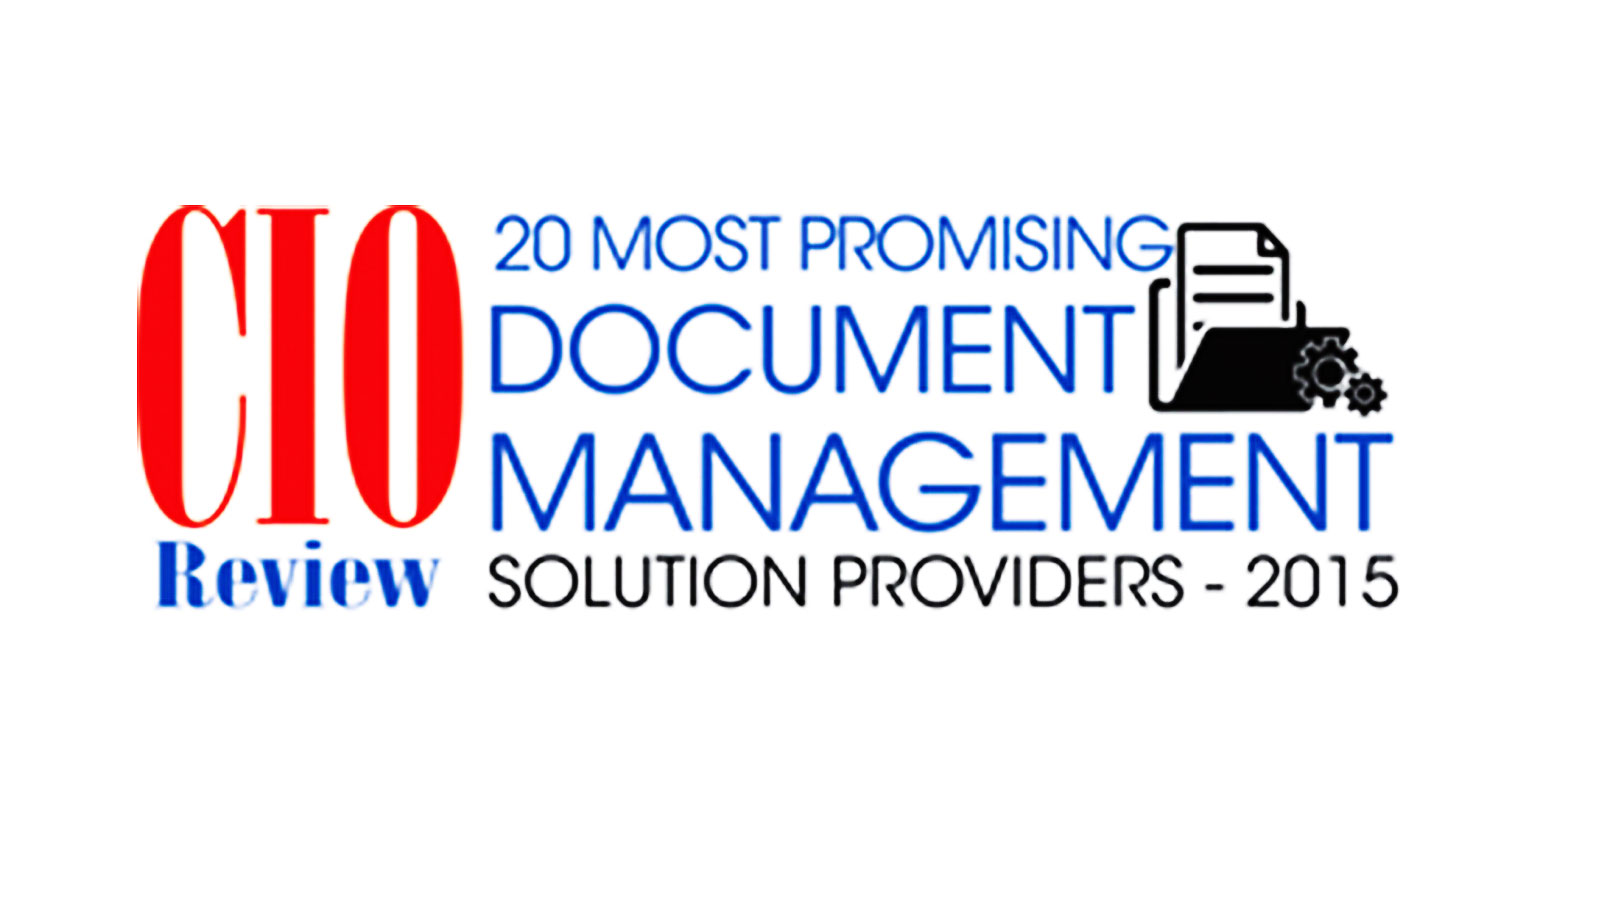 CIOReview – Asite achieves award for 20 most promising document management provider solutions for 2015